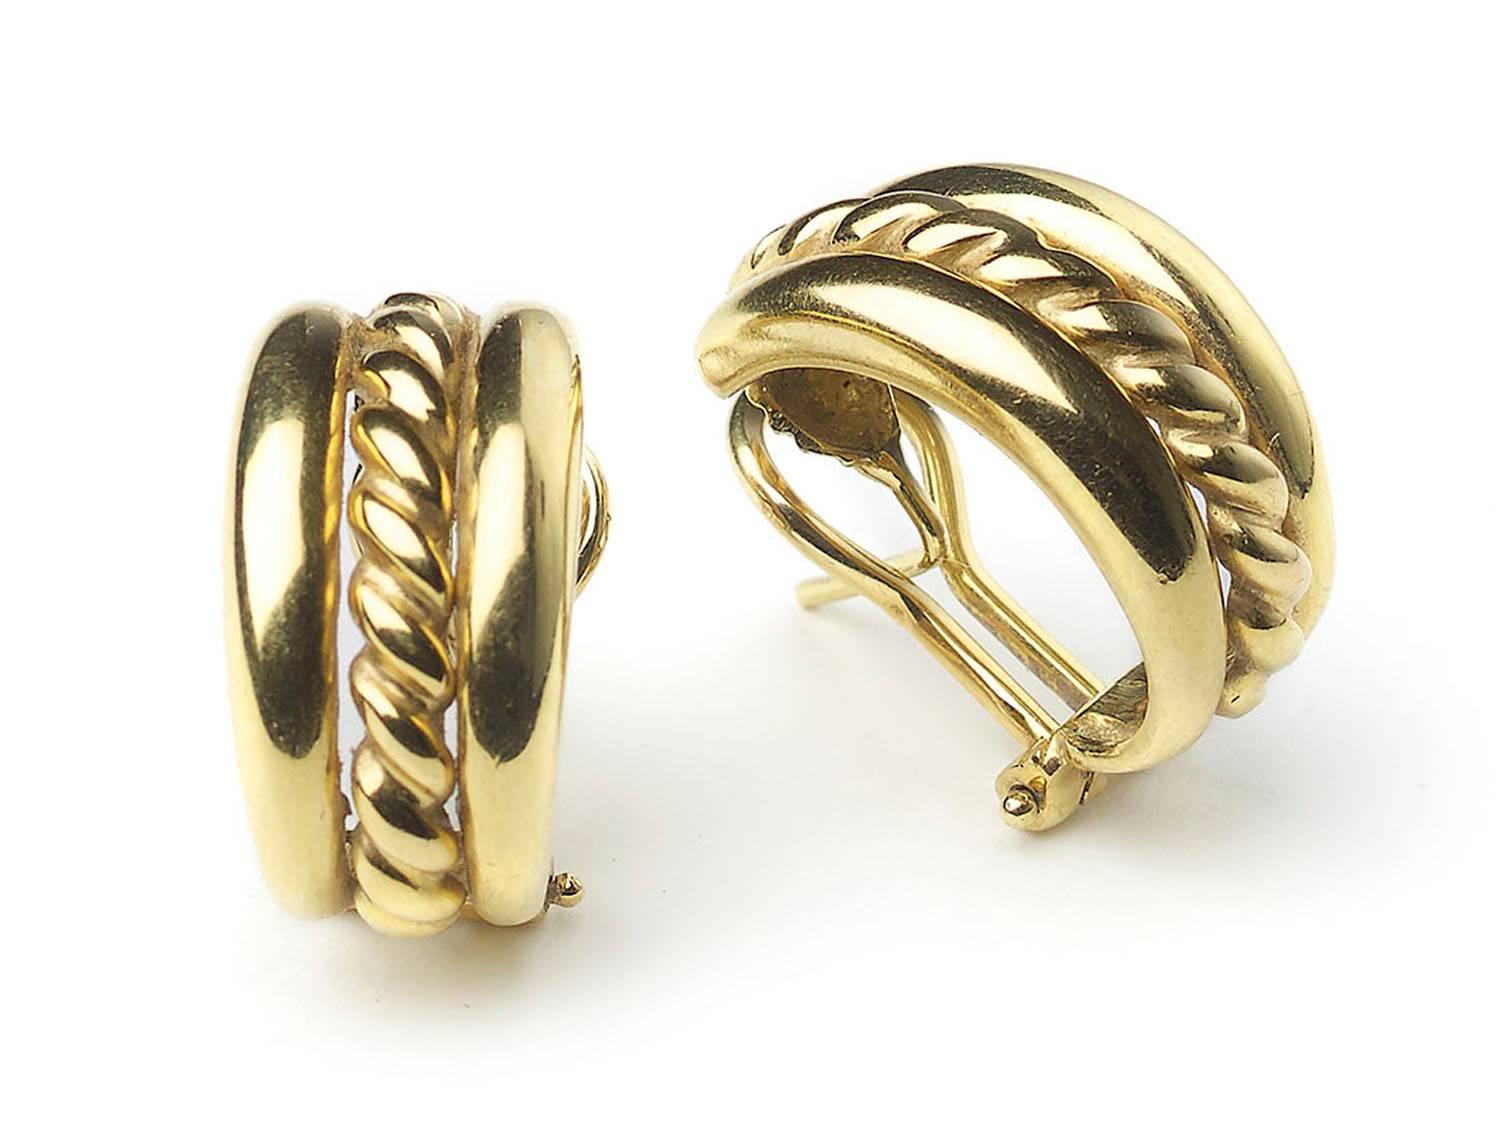 A pair of 18ct gold half hoop earrings, designed as three sections the centre a gold rope effect with plain gold sides, clip and post fittings. 